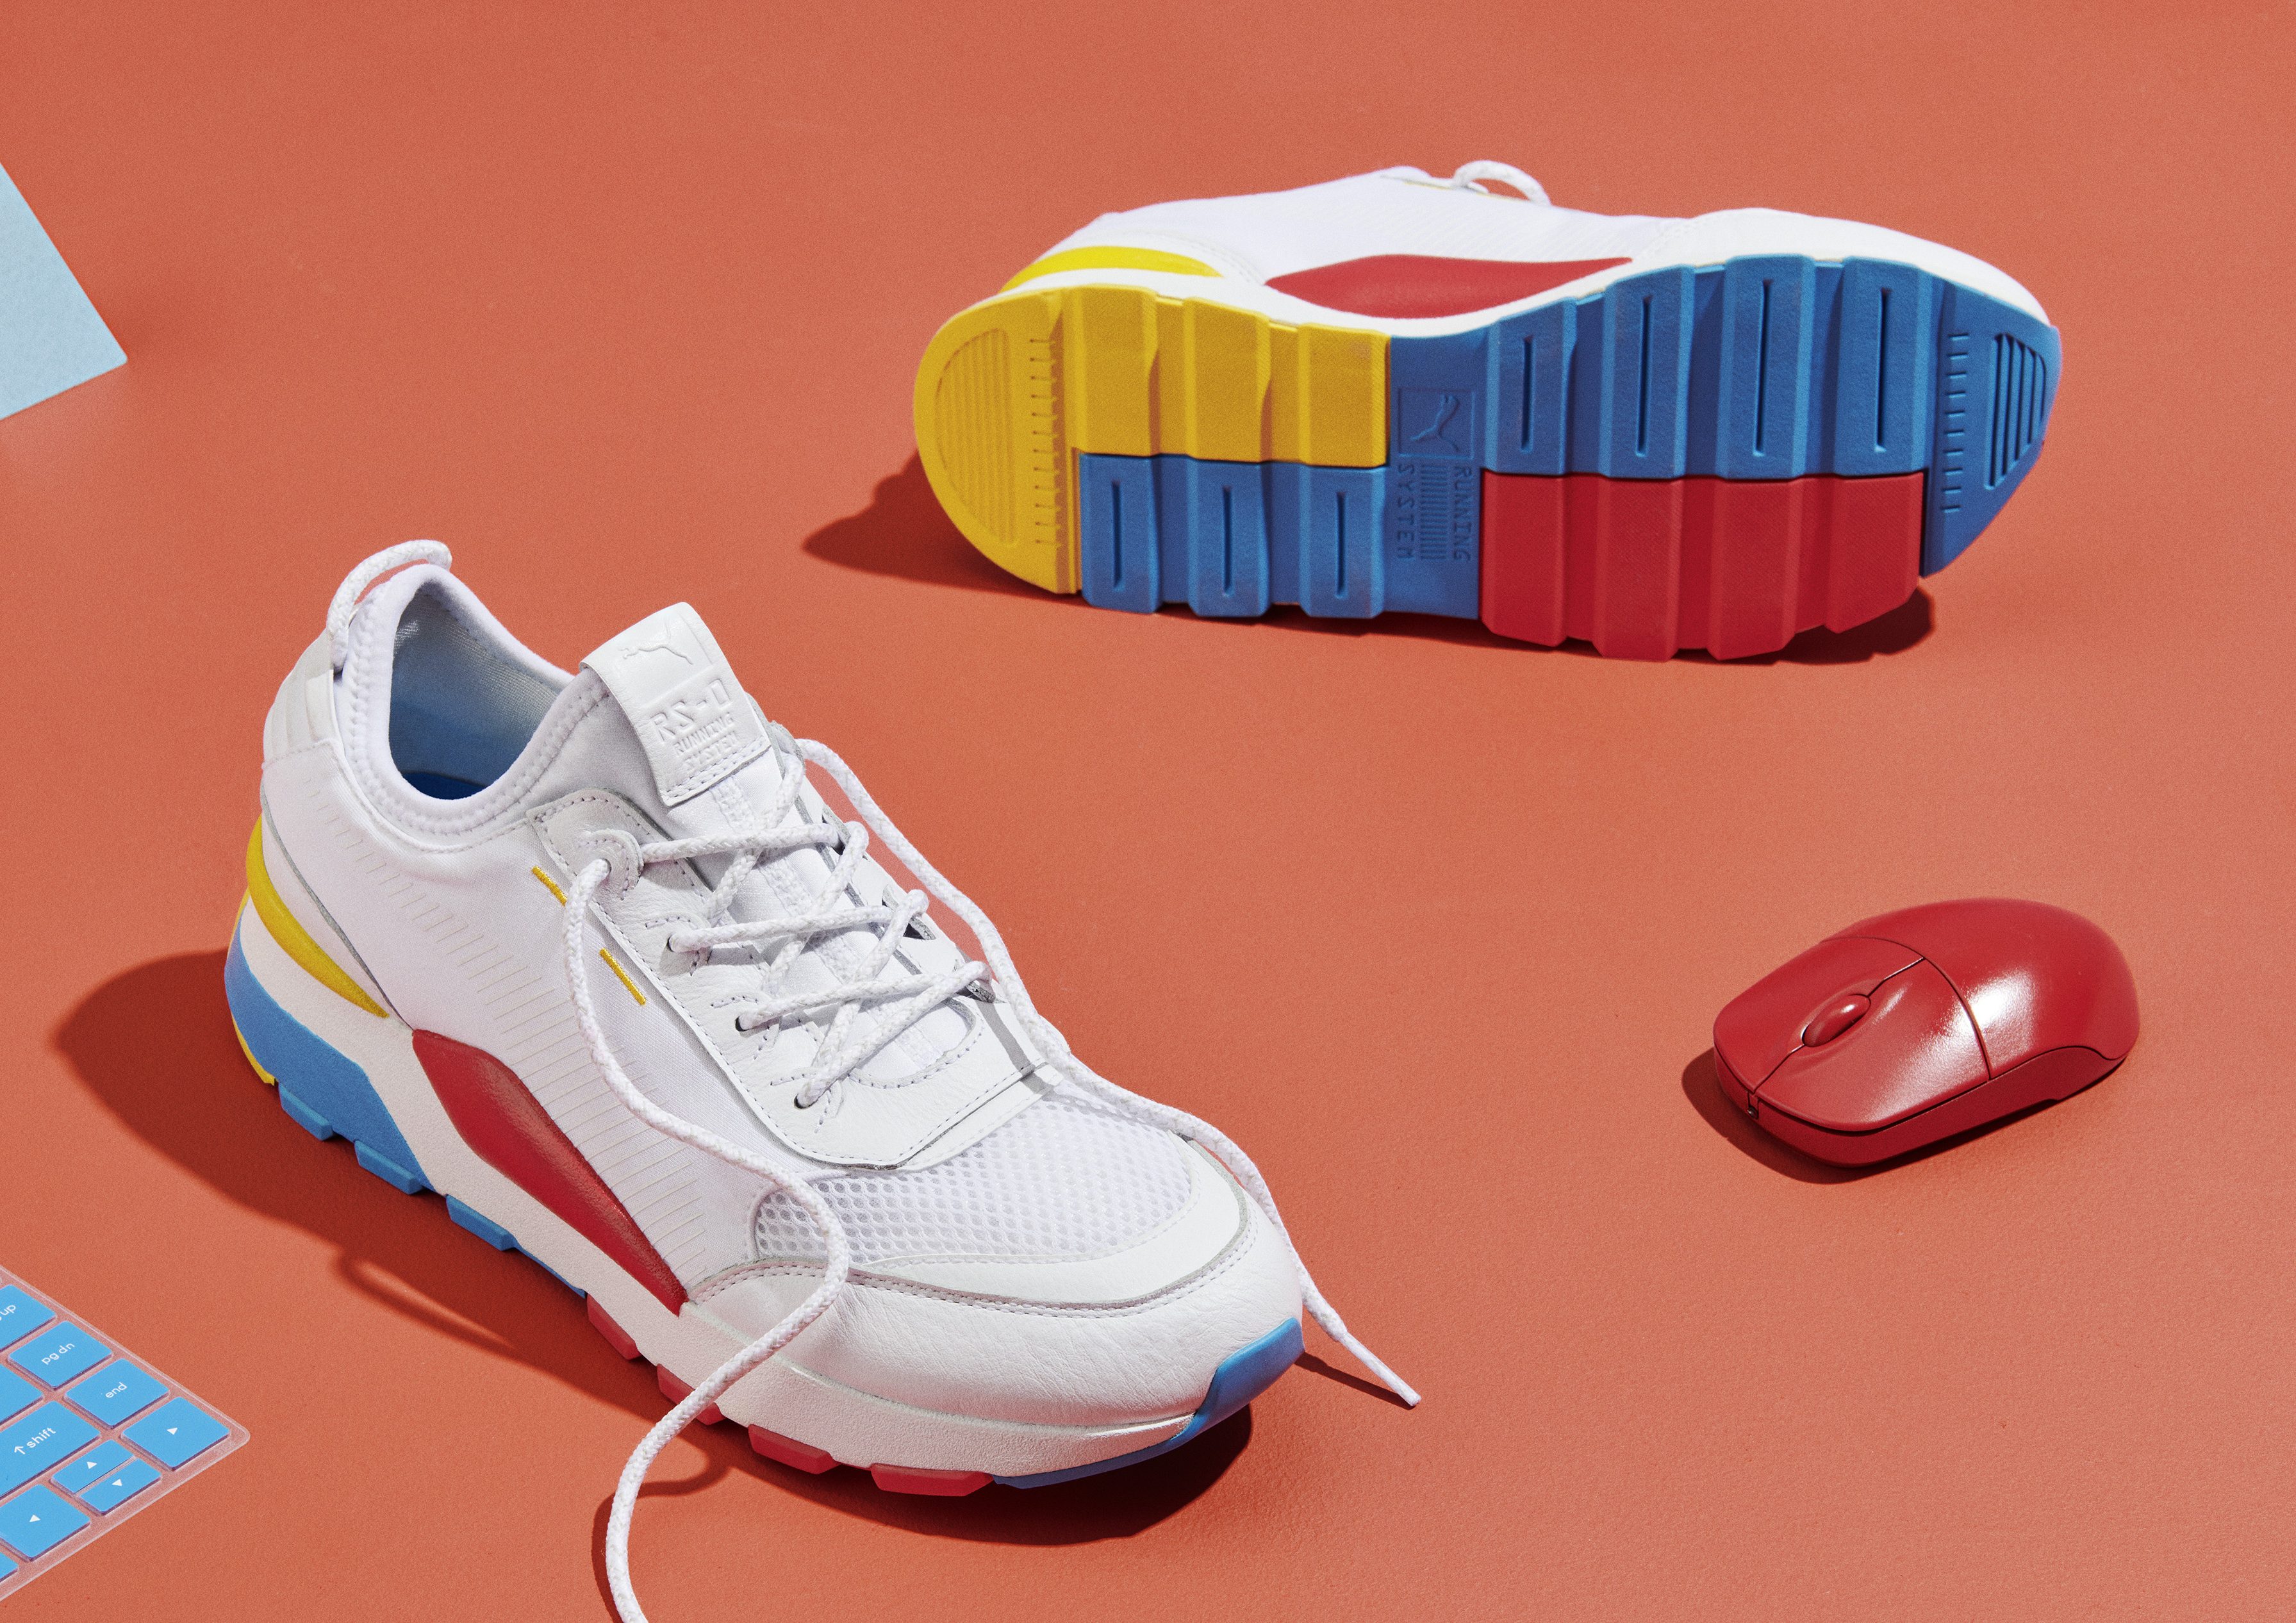 Inspired by '80s Video Games, Puma Goes Retro with the RS-0 Play